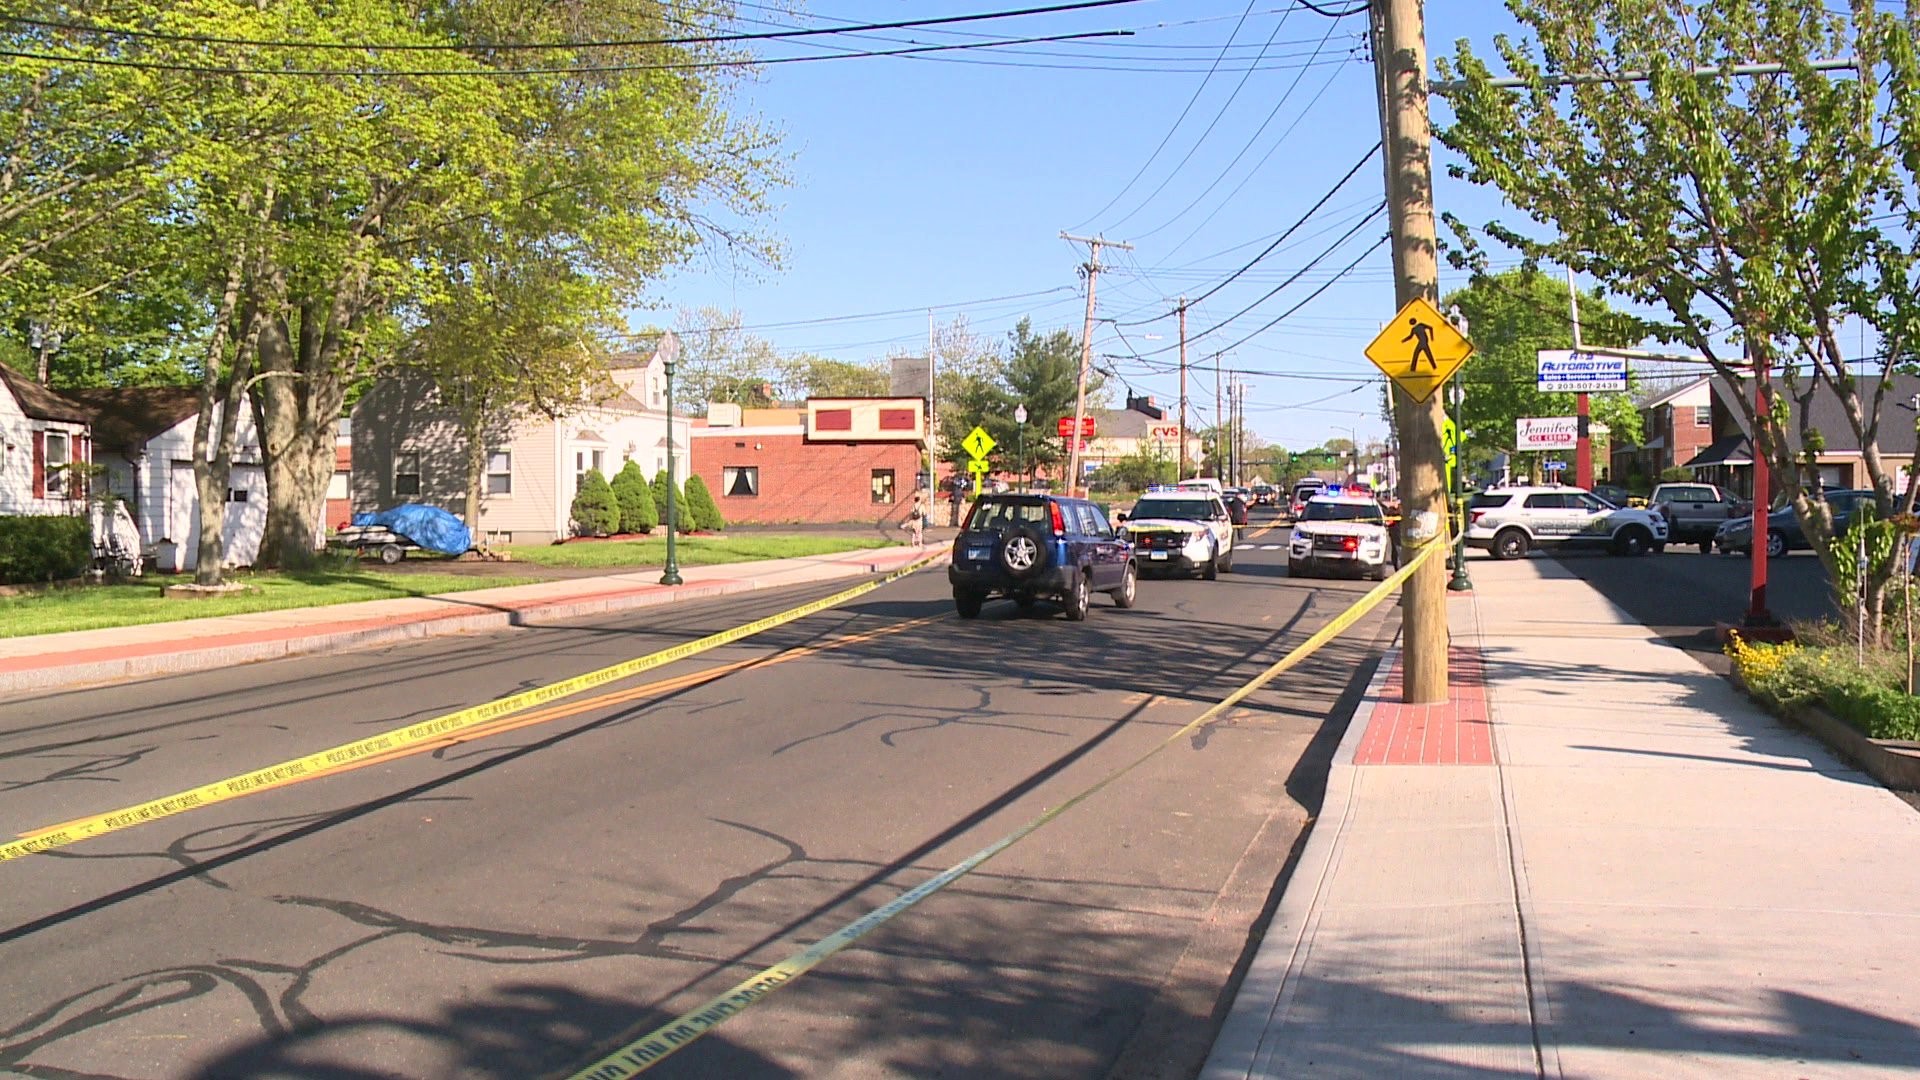 Kid hit by car in East Haven